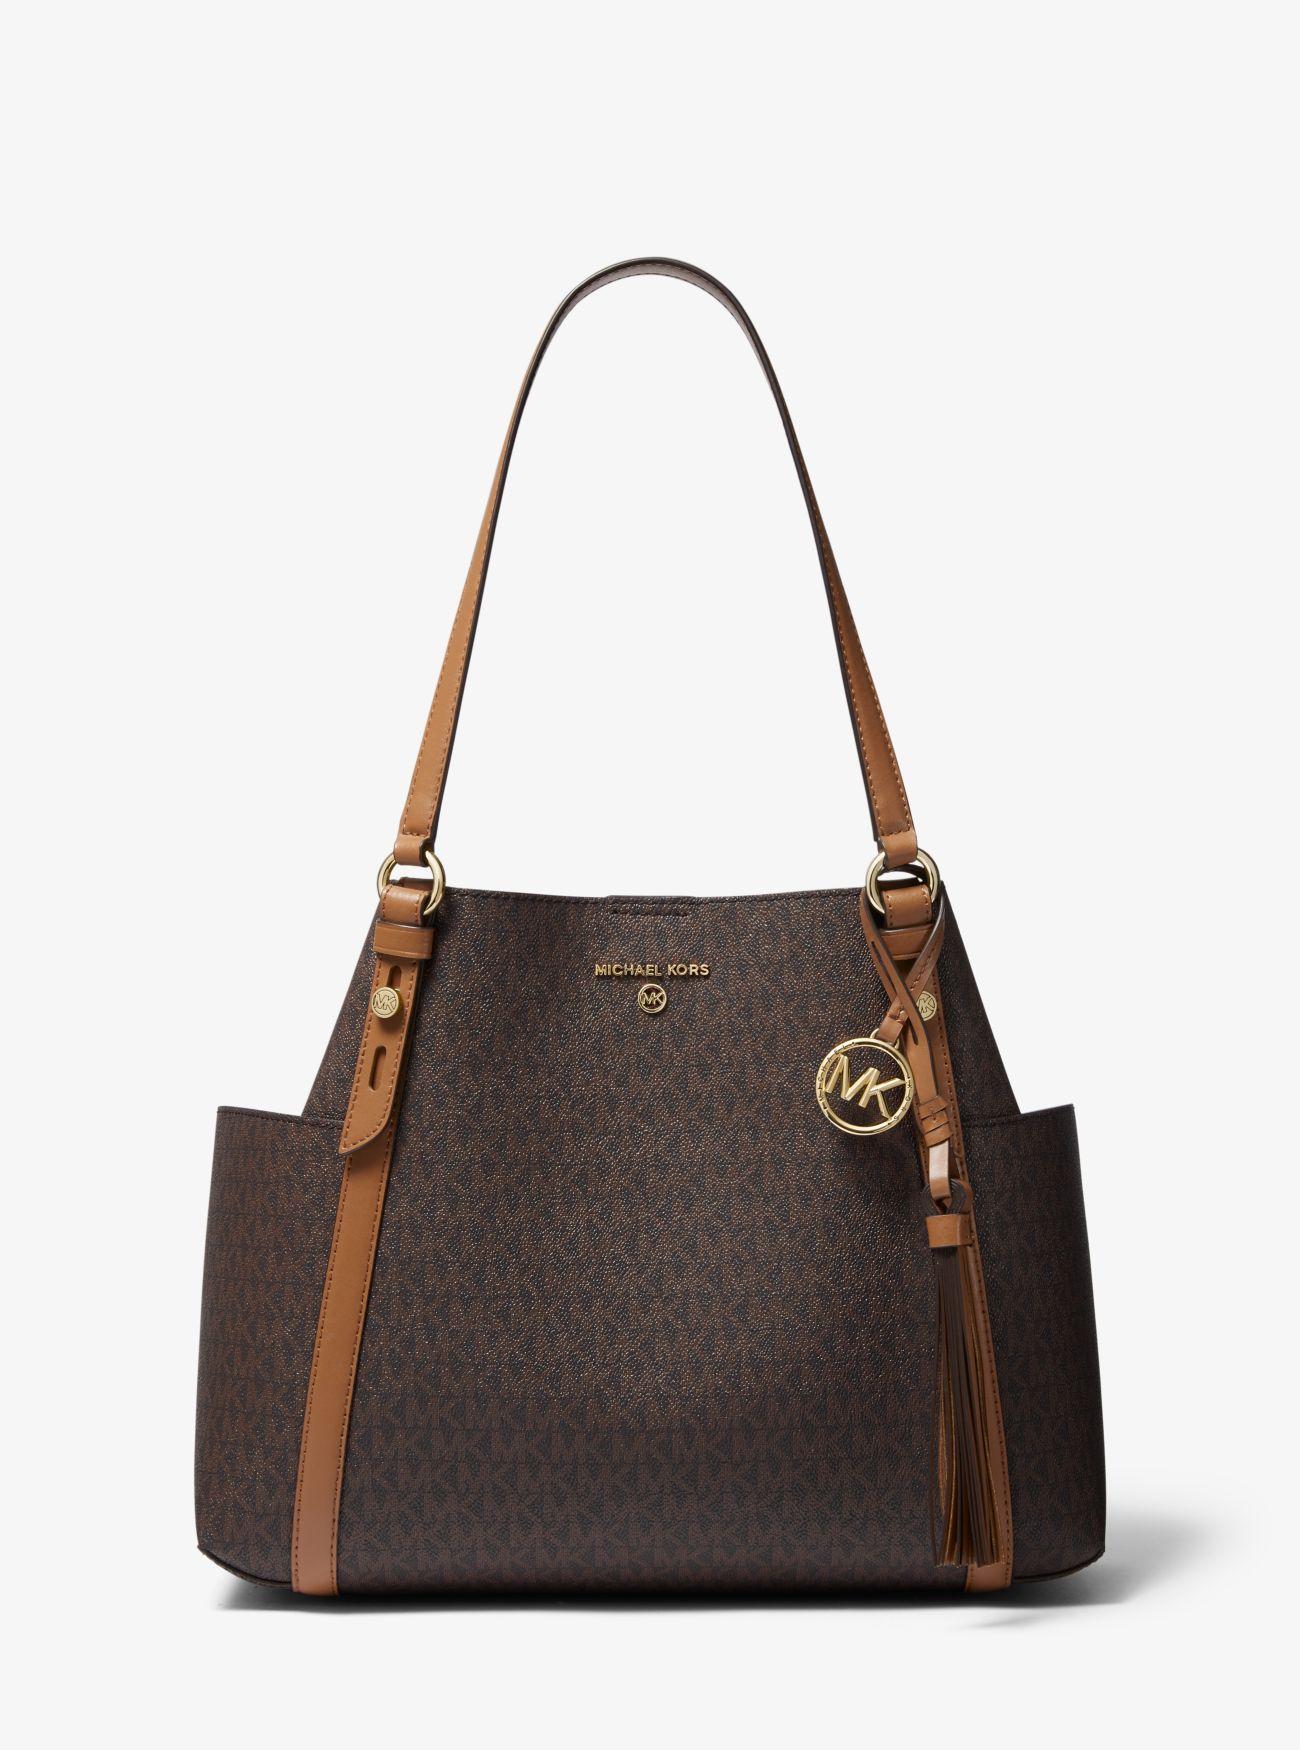 Michael Kors Canvas Nomad Large Logo Tote Bag in Brown - Lyst